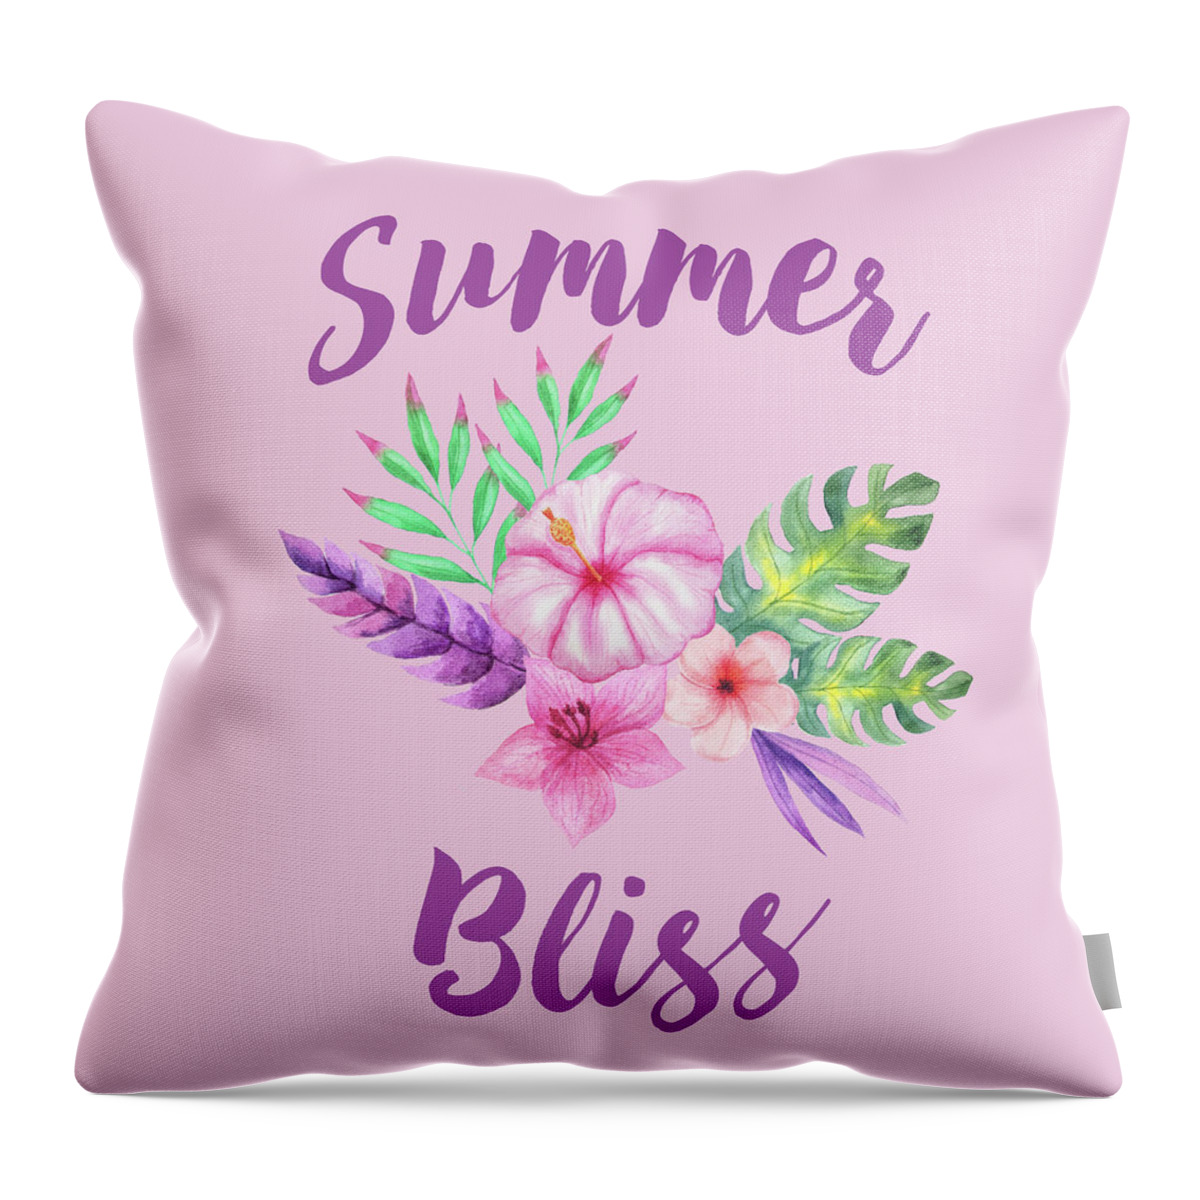 Towel Throw Pillow featuring the photograph Summer Bliss - Square by Thomas Leparskas